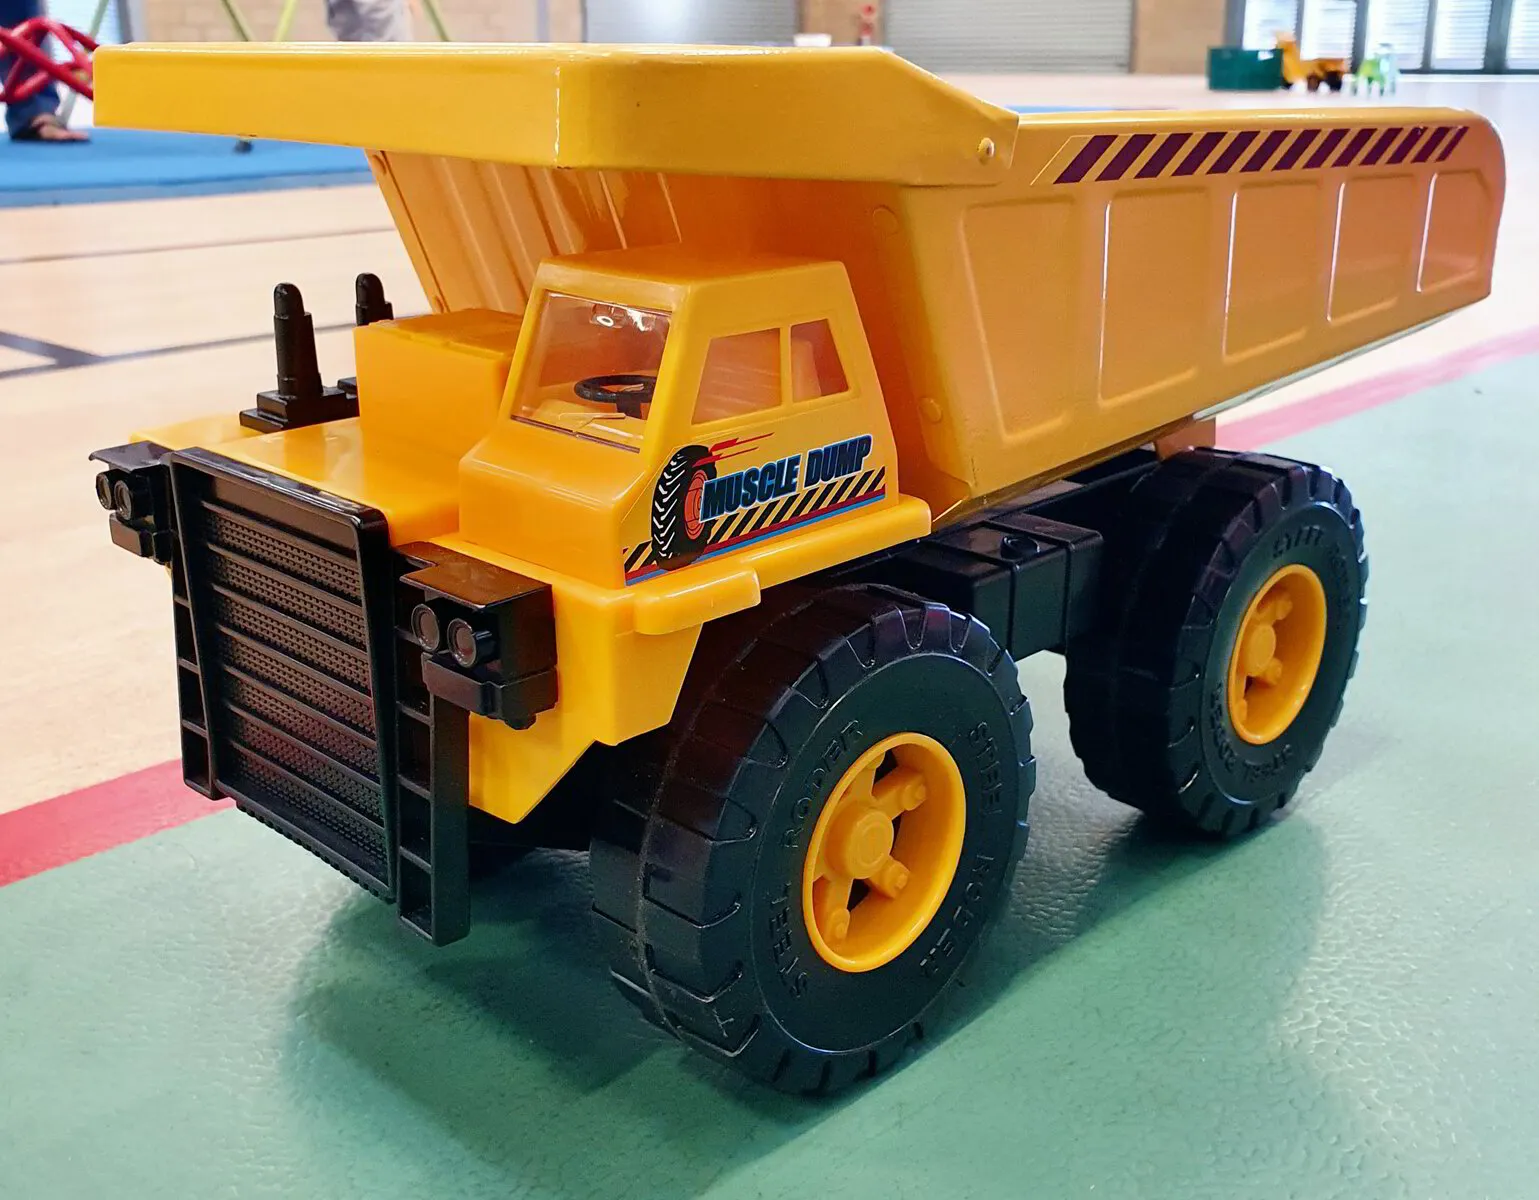 Lacking creativity? Maybe you need a toy truck